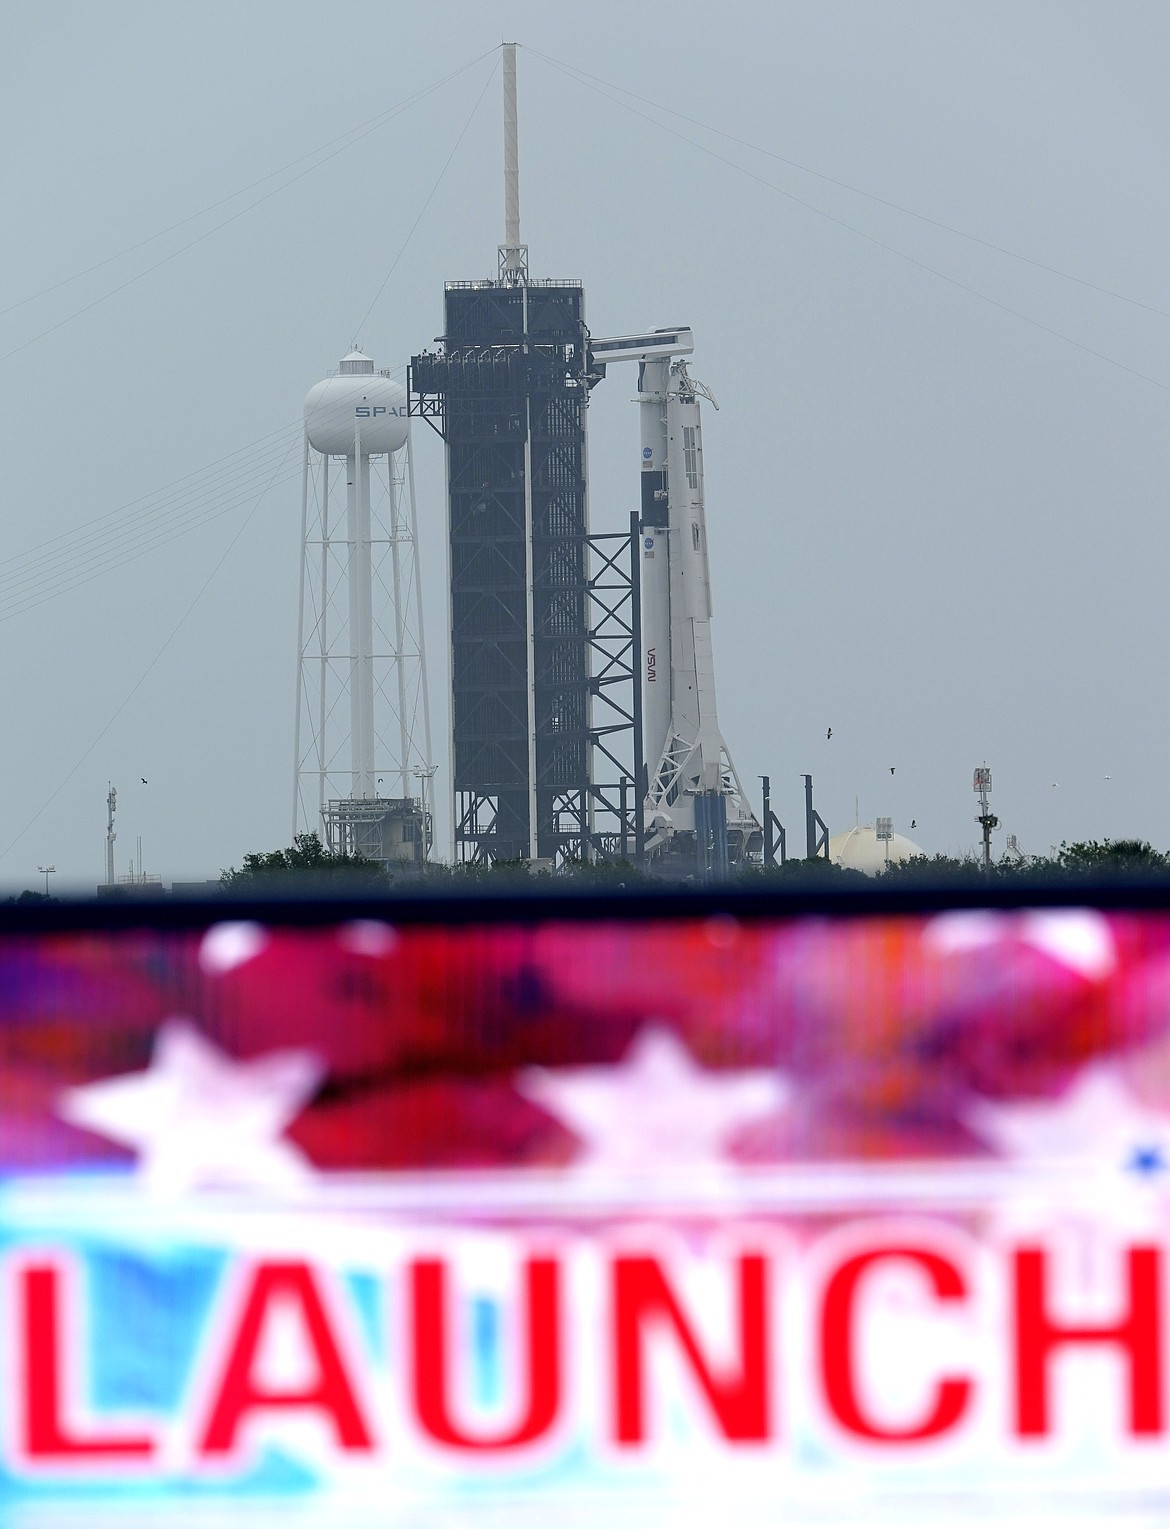 The SpaceX Falcon 9, with the Crew Dragon spacecraft on top of the rocket, sits on Launch Pad 39-A Monday, May 25, 2020, at Kennedy Space Center, Fla. Two astronauts will fly on the SpaceX Demo-2 mission to the International Space Station scheduled for launch on May 27. (AP Photo/David J. Phillip)